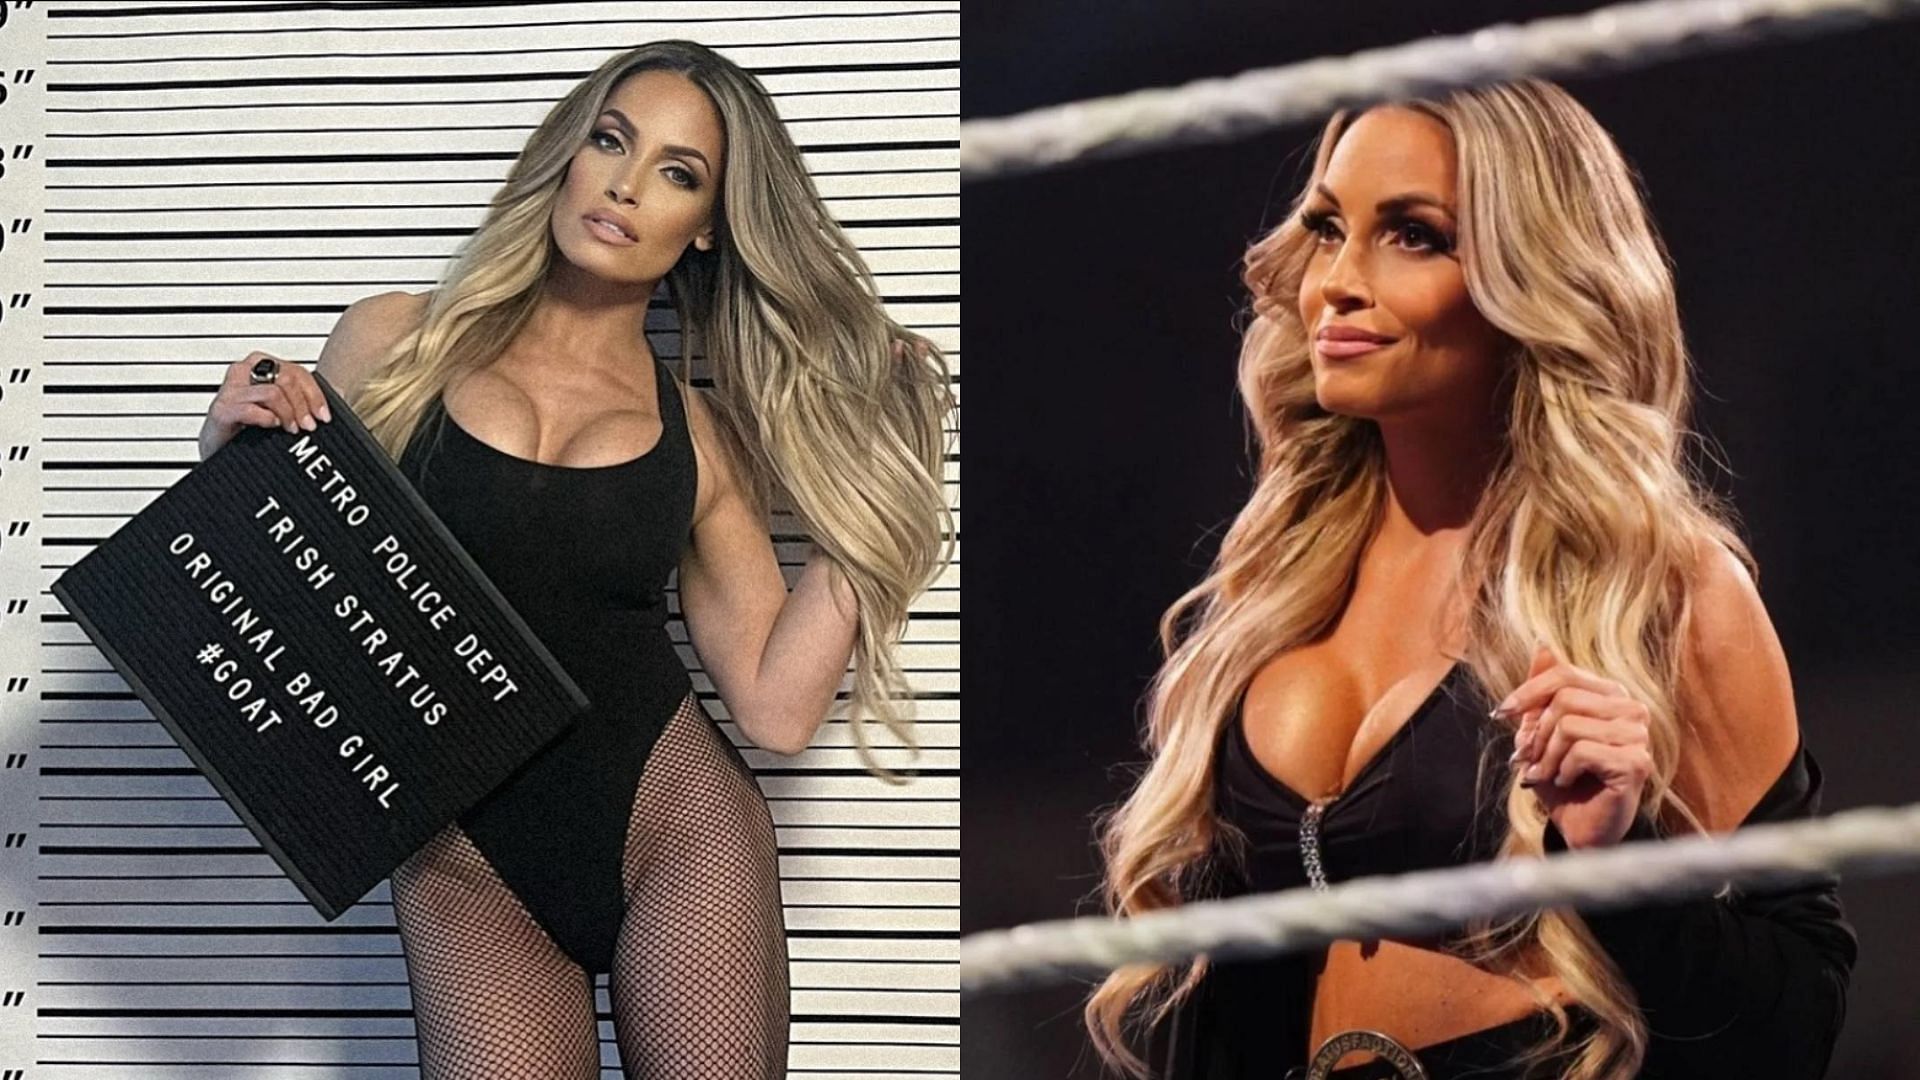 Trish Stratus is one of the most celebrated superstars in WWE